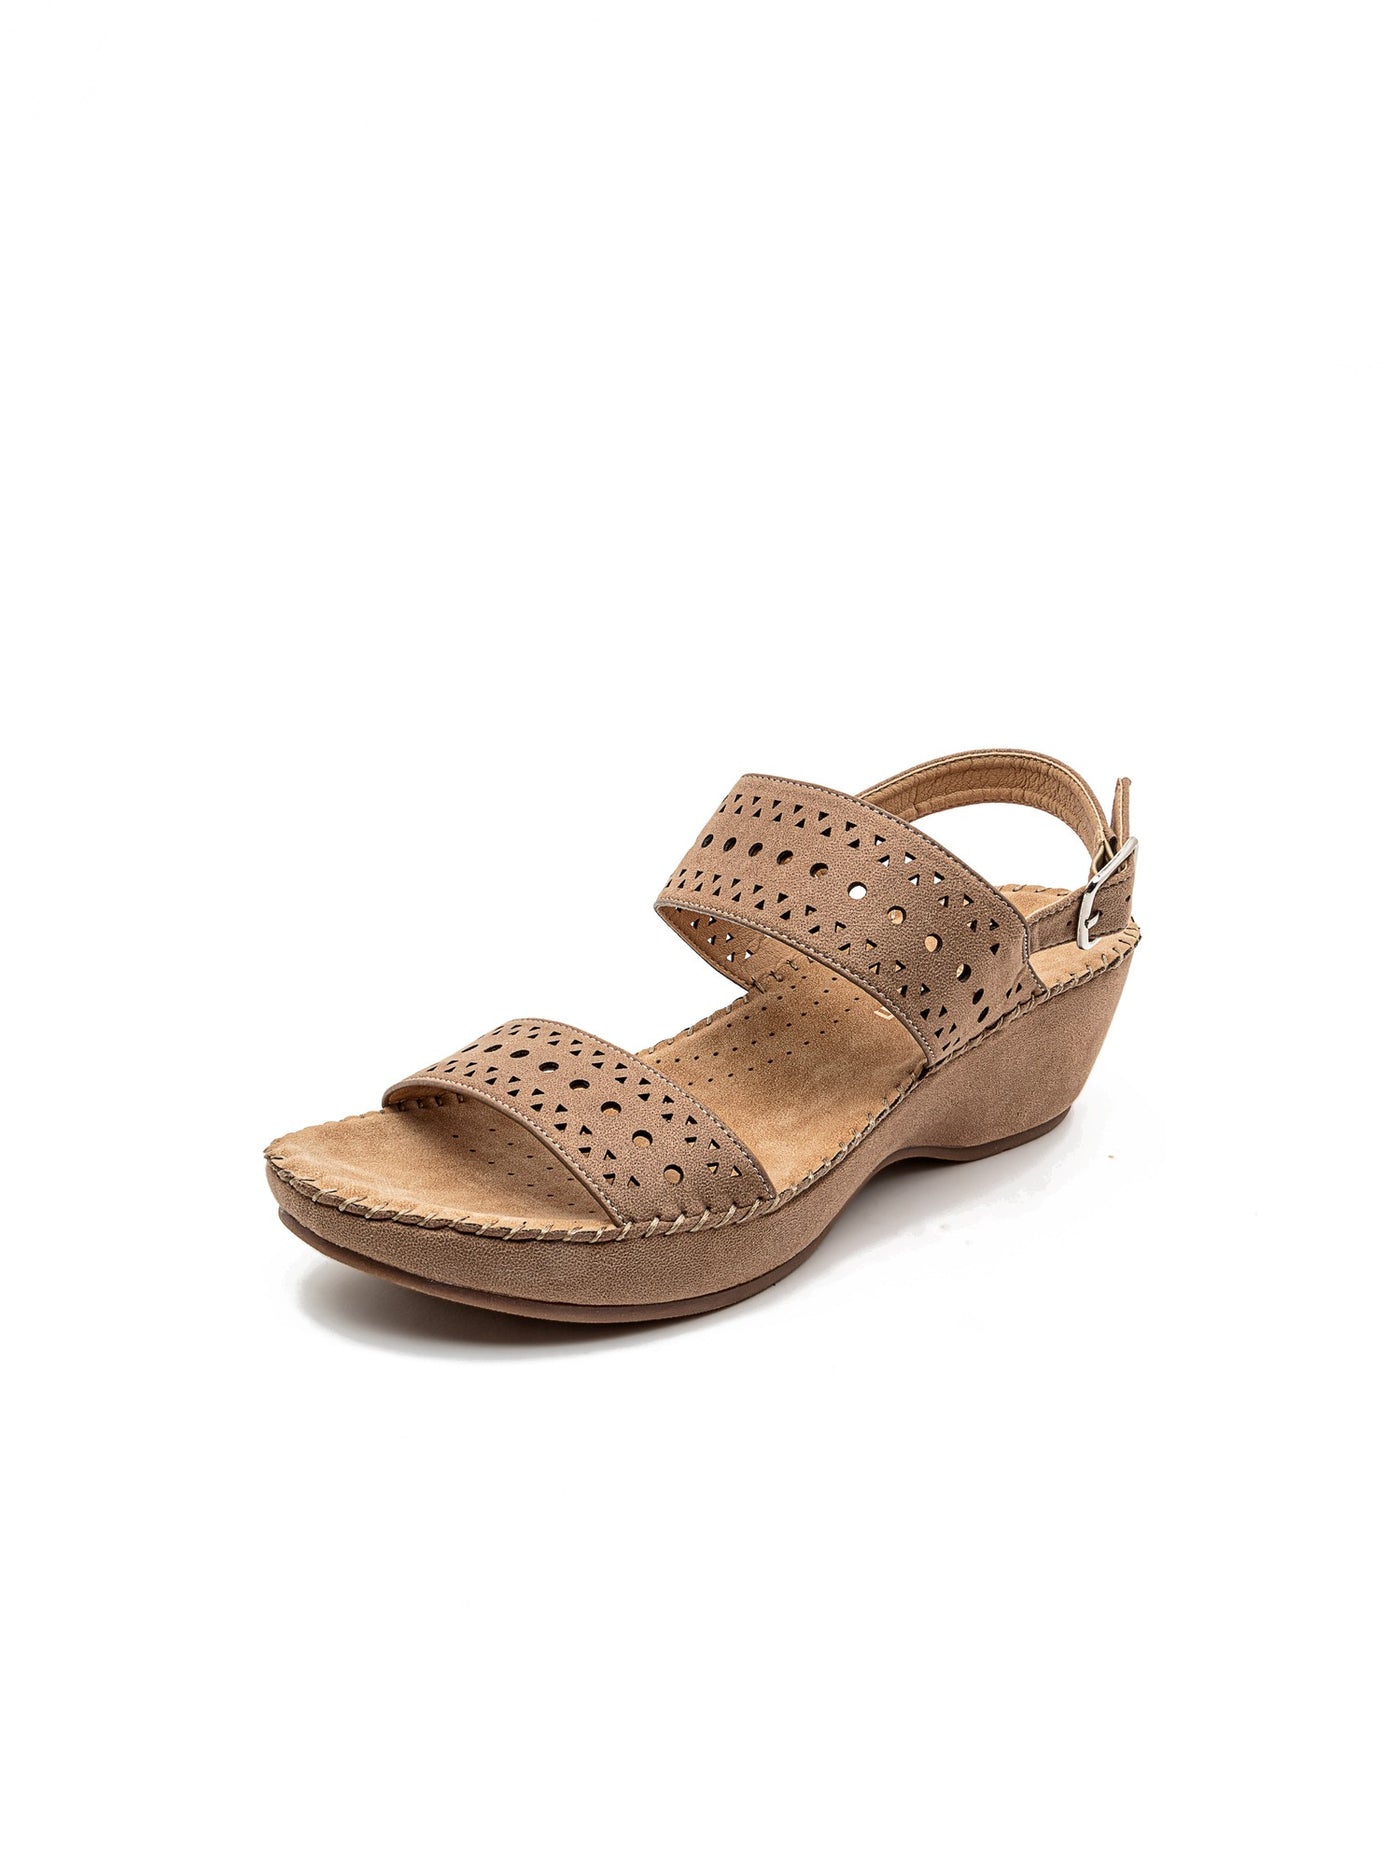 Shoeroom Womens Double Perforated Strap Platform Sandals